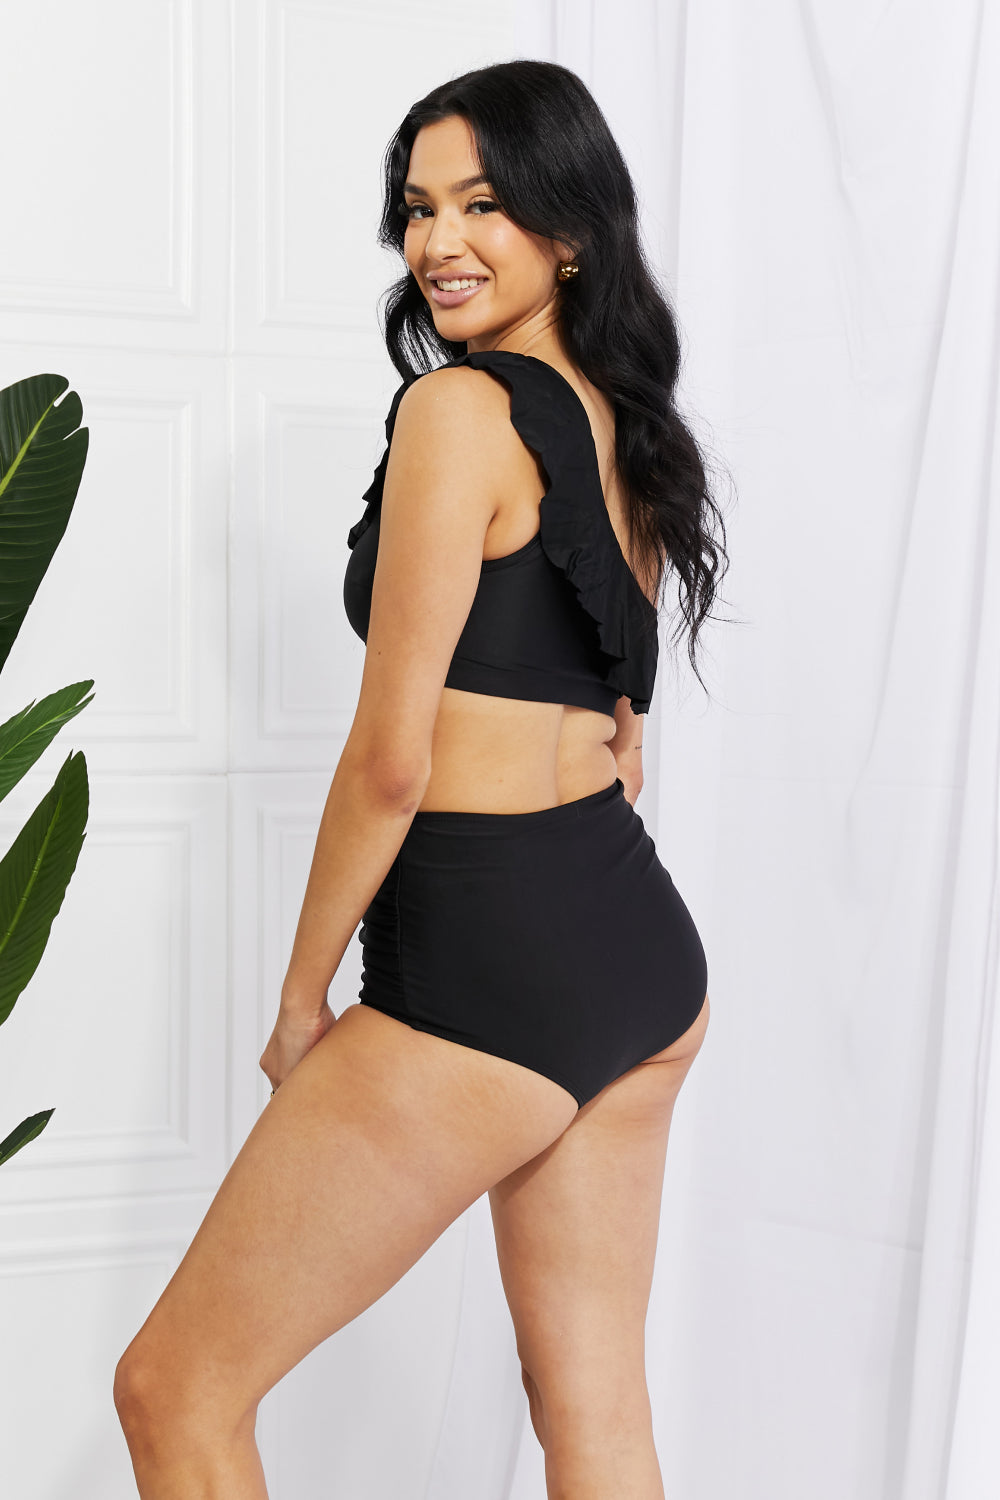 a woman in a black swimsuit posing for the camera